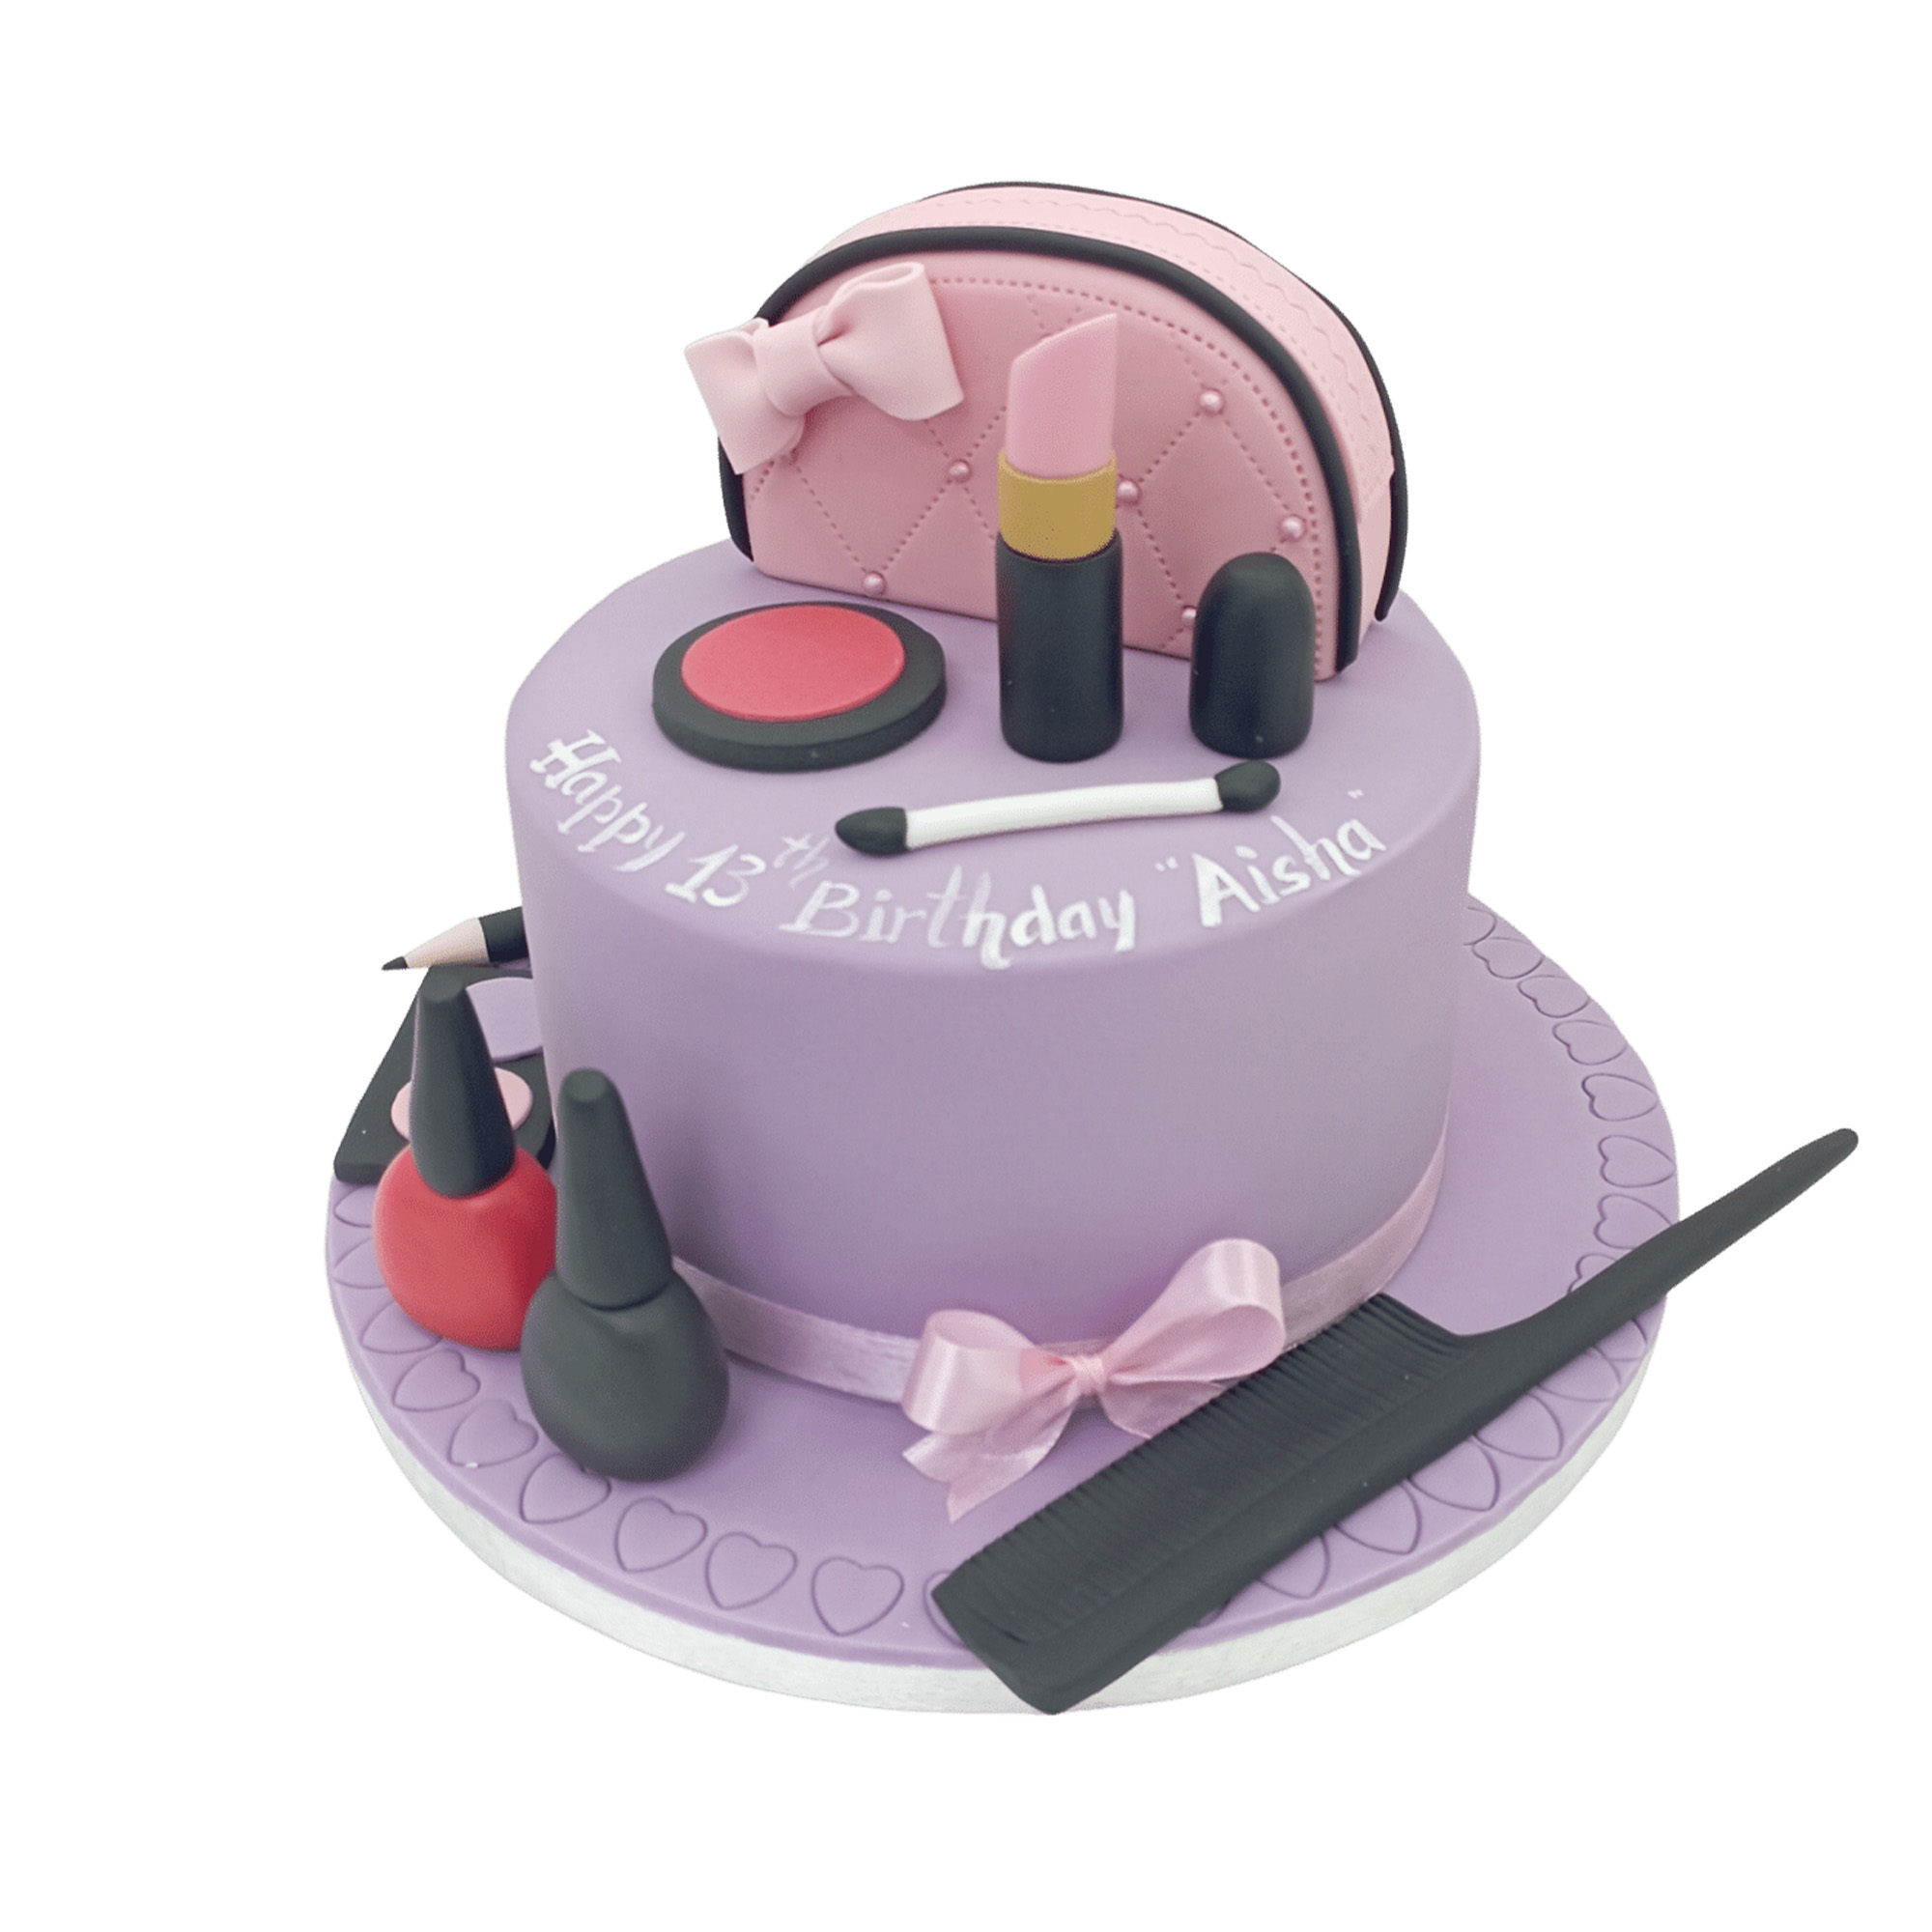 Makeup themed Birthday Cake for daughter